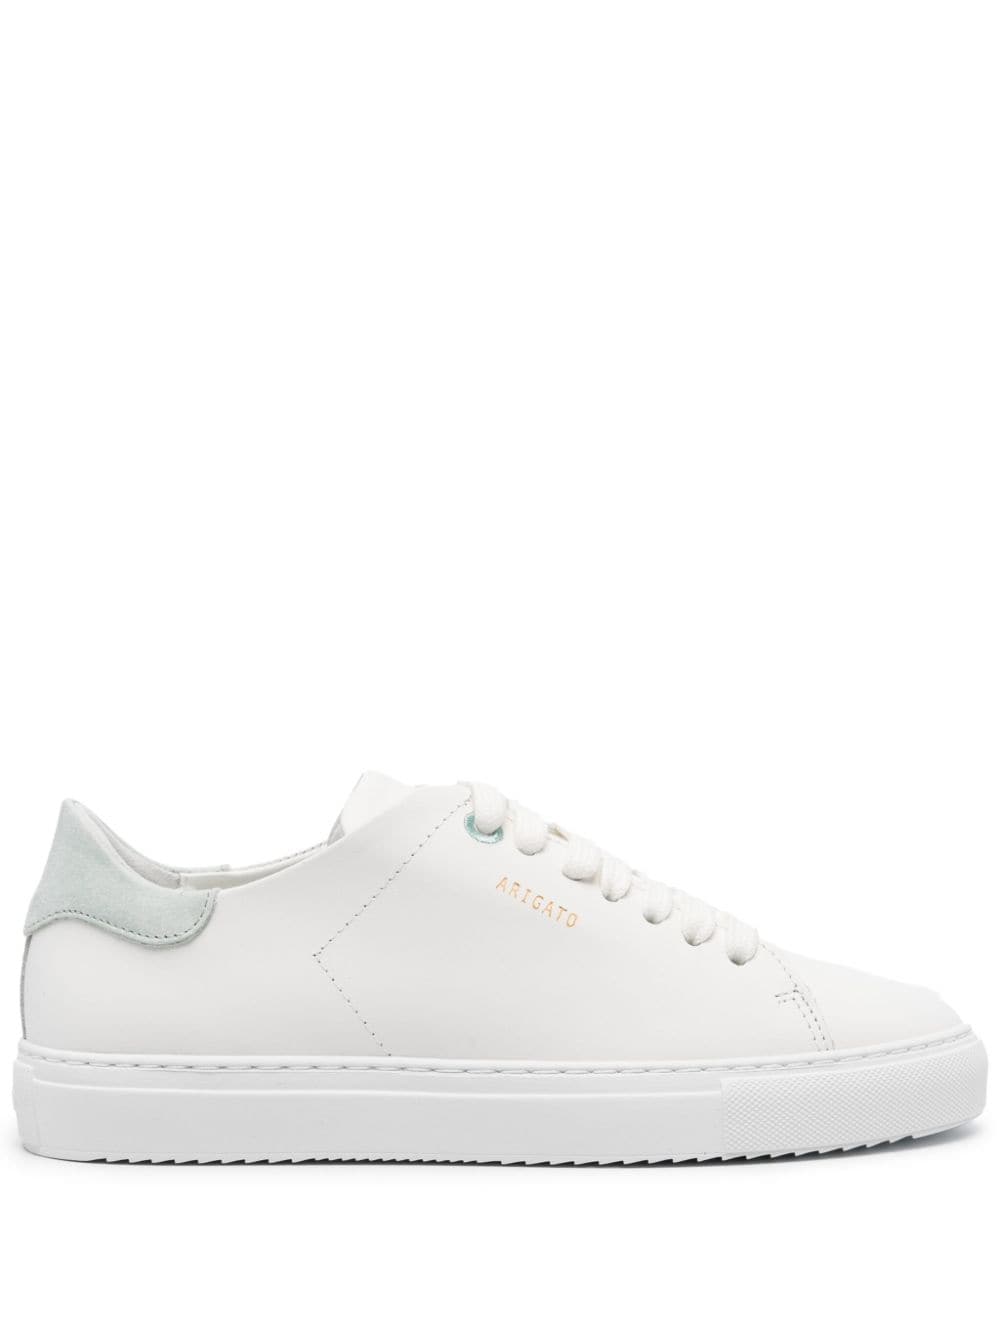 Axel Arigato Sneakers Clean 90 - Bianco